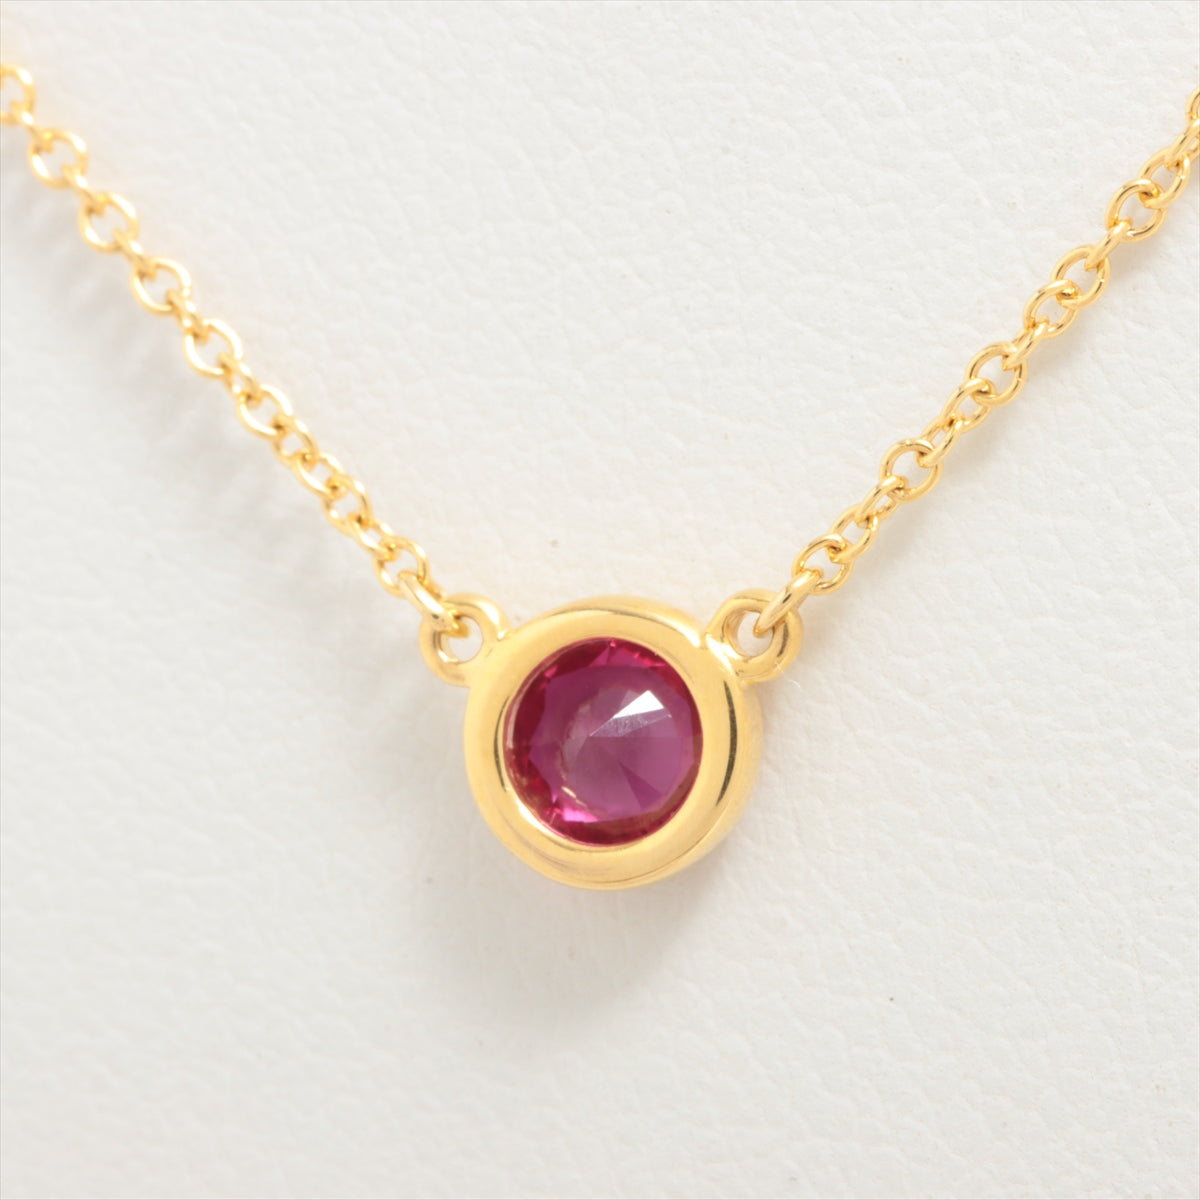 Tiffany Kolor By the Yard Ruby Necklace 750(YG) 2.0g Approximately 5.52 mm in diameter